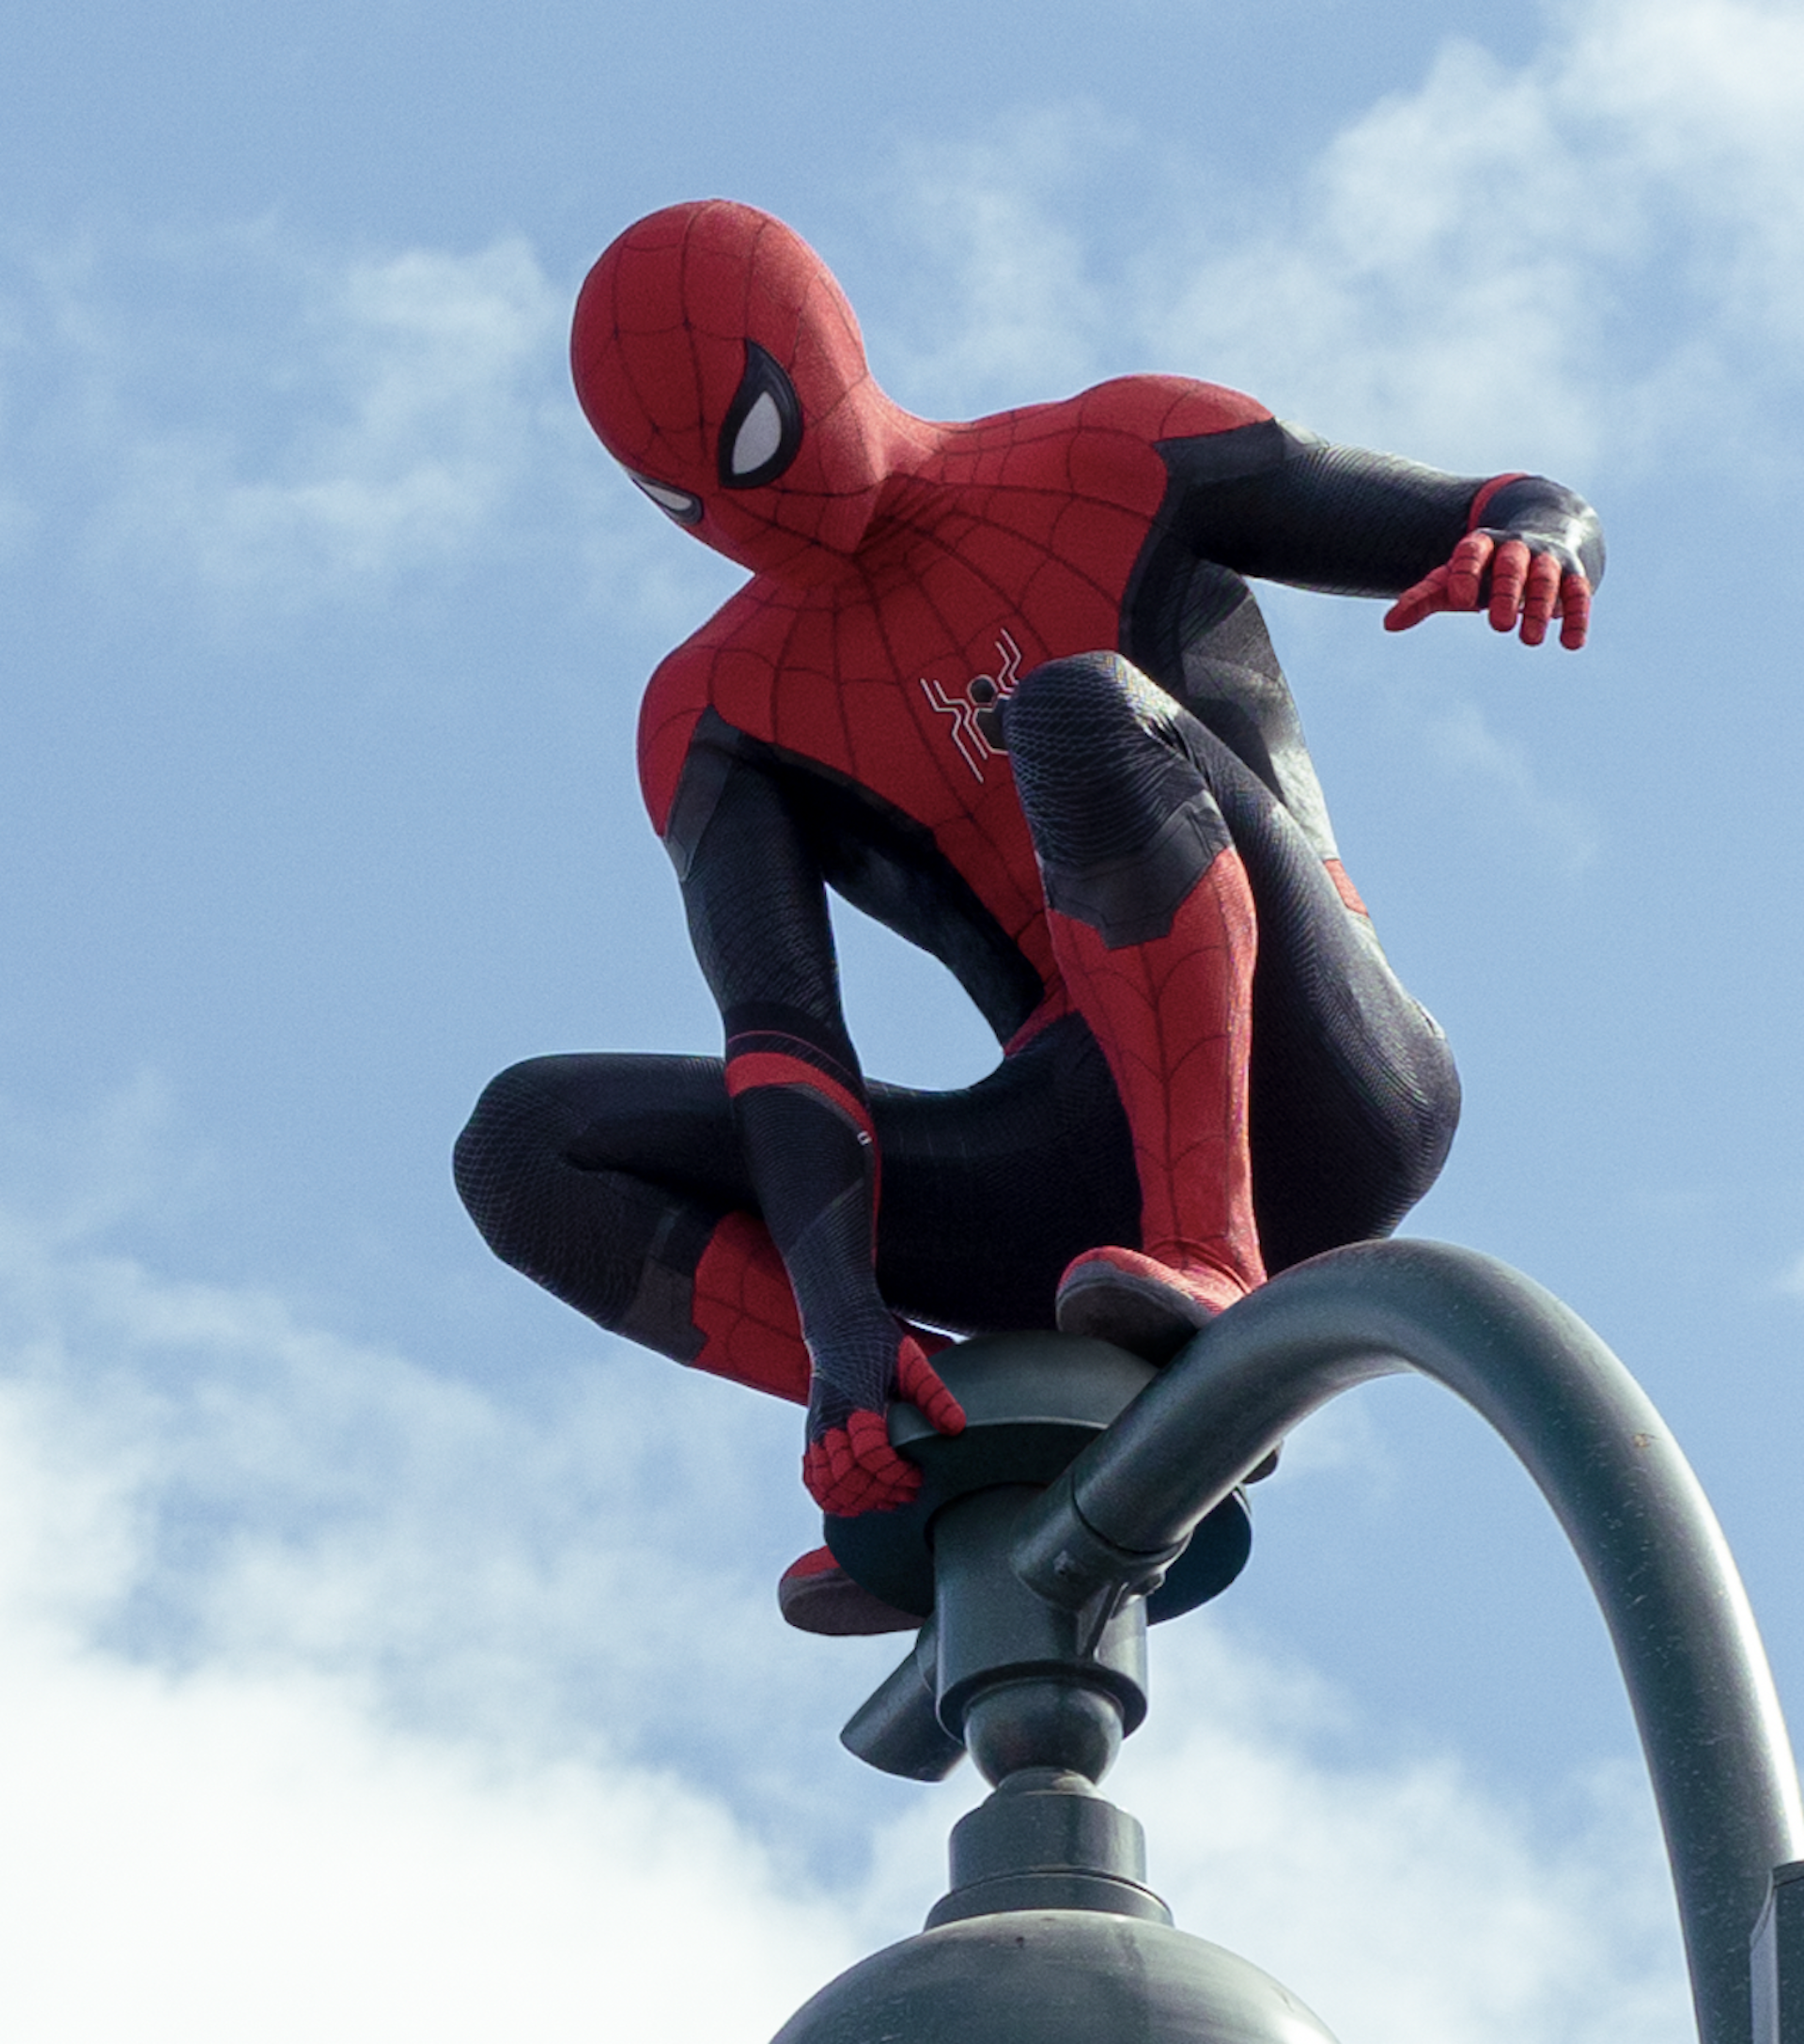 One of Marvel's most popular characters, Spider-Man, was a Stan Lee invention.